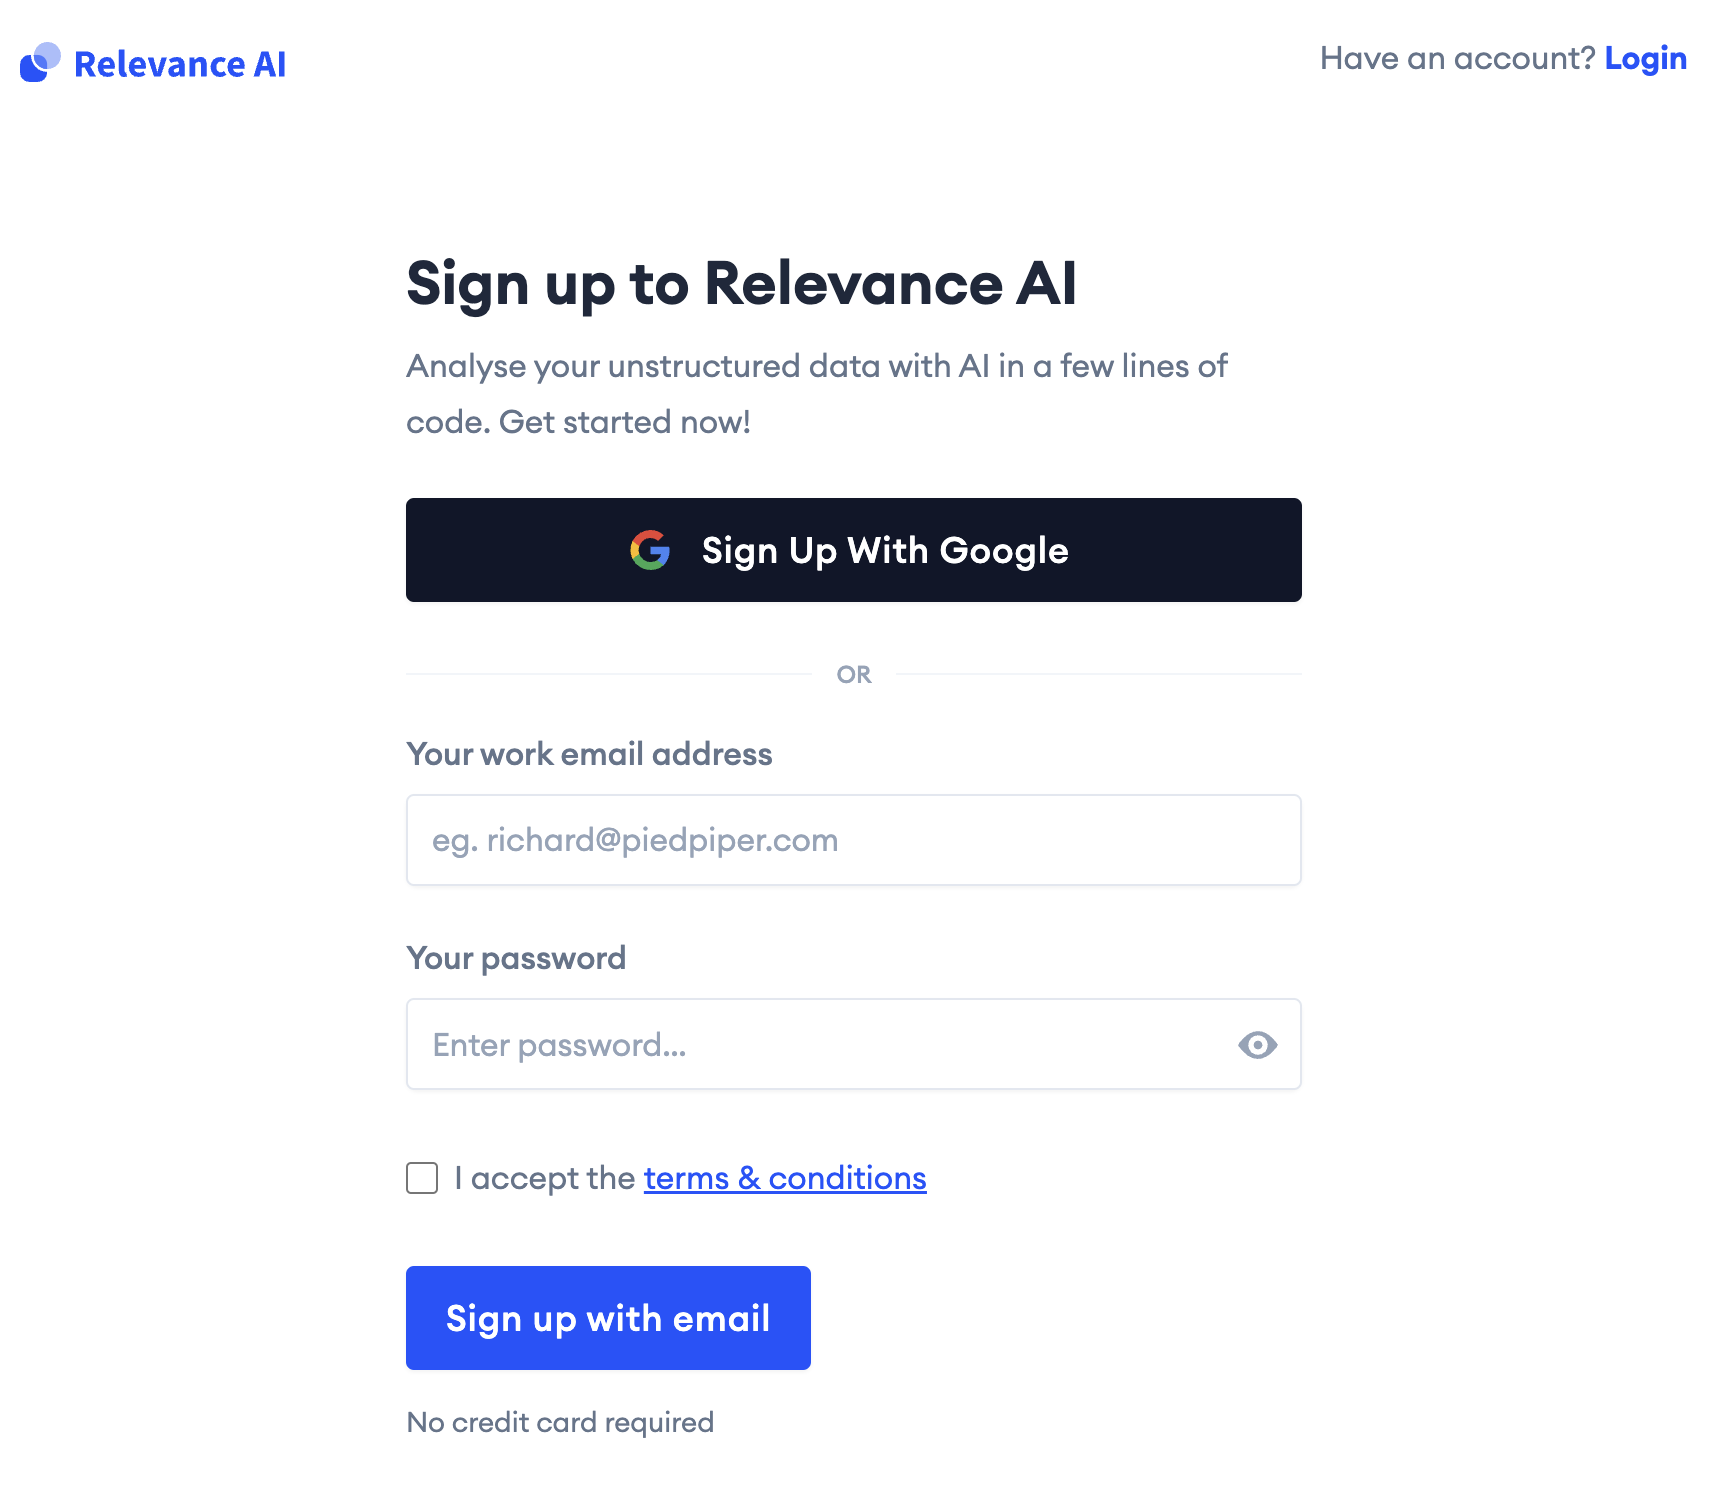 Relevance AI's sign-up page.